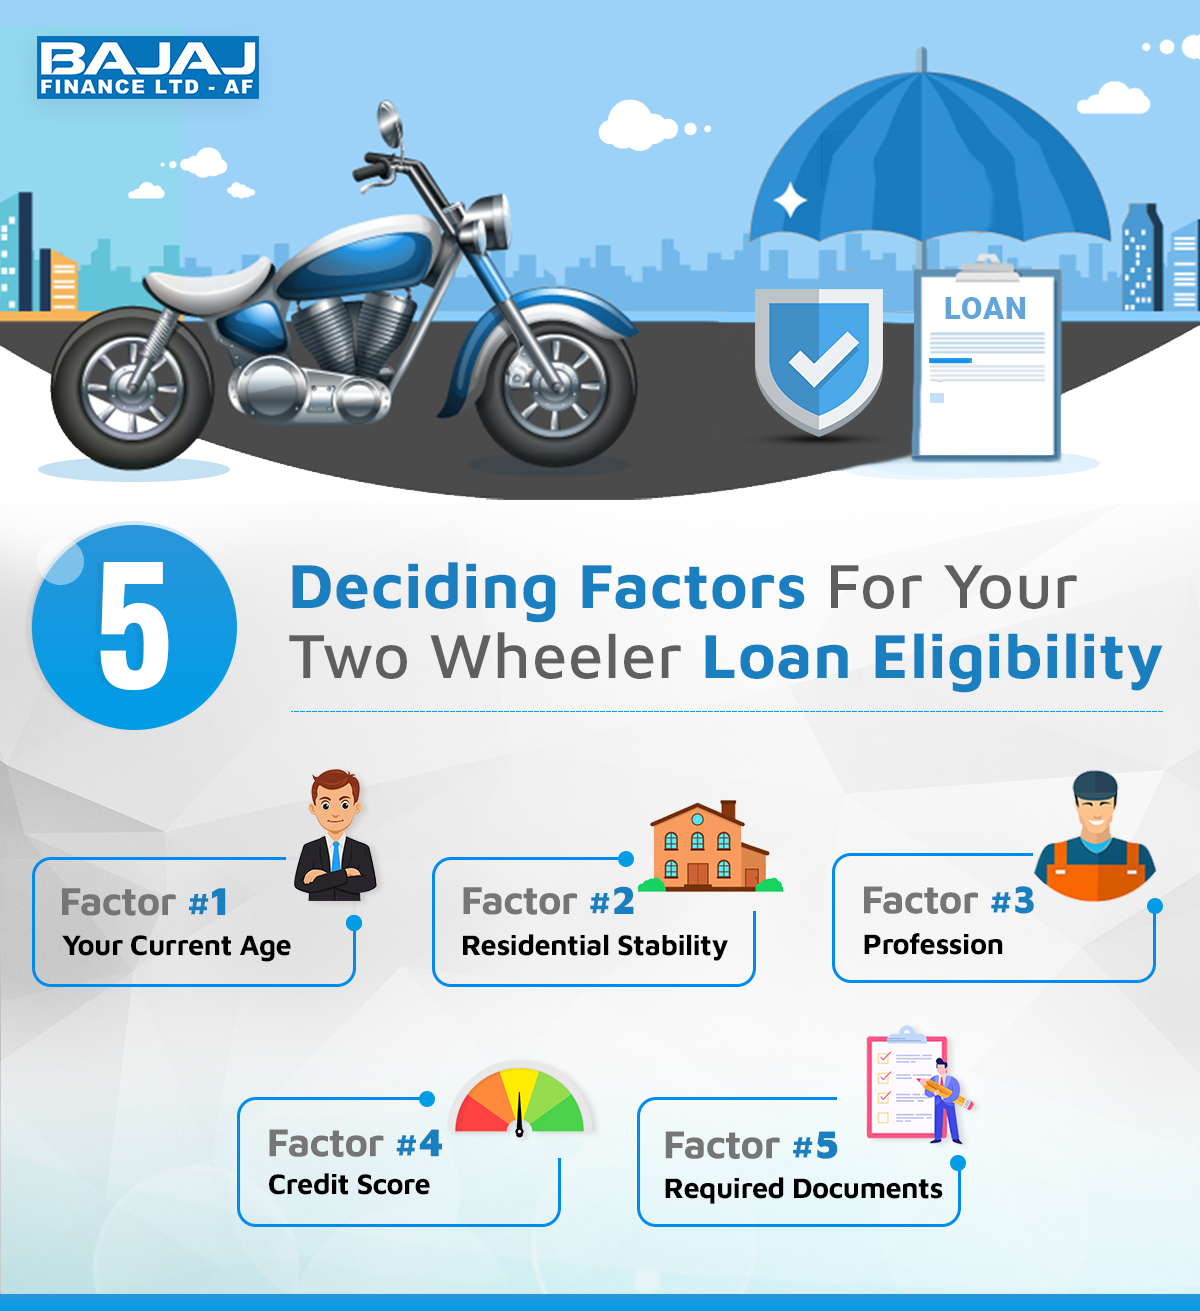 5 Deciding Factors For Your Two Wheeler Loan Eligibility